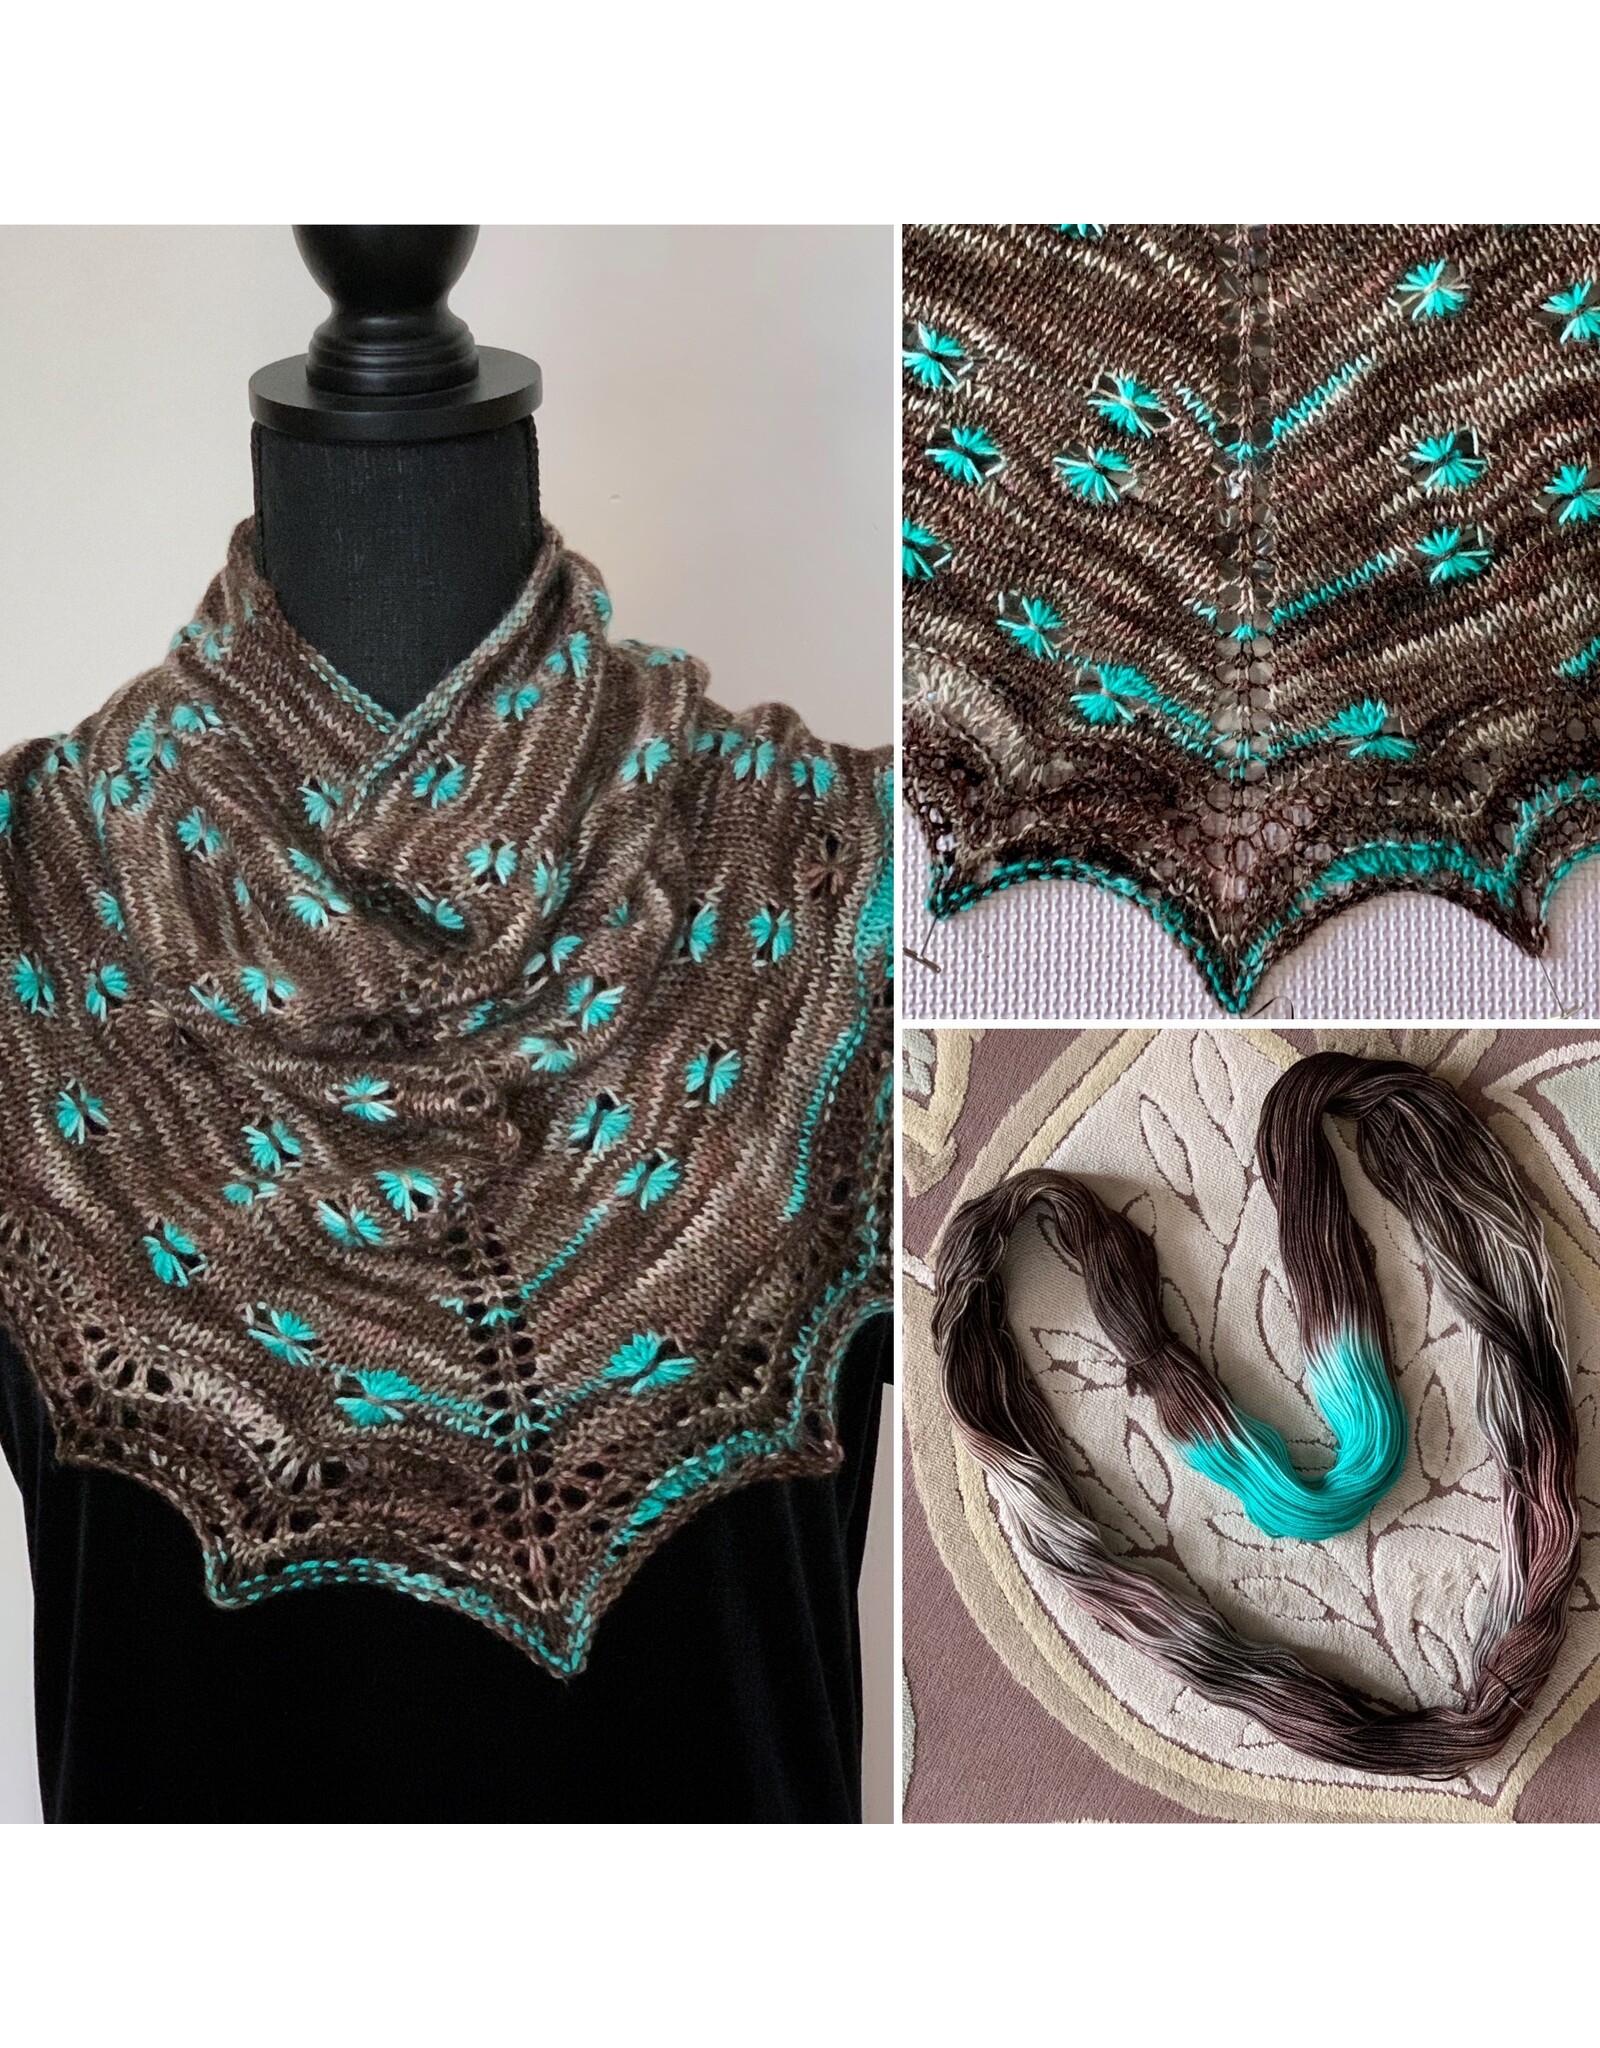 Assigned Pooling – The Starfall Cowl (A Zoom Event).  Sunday November 12